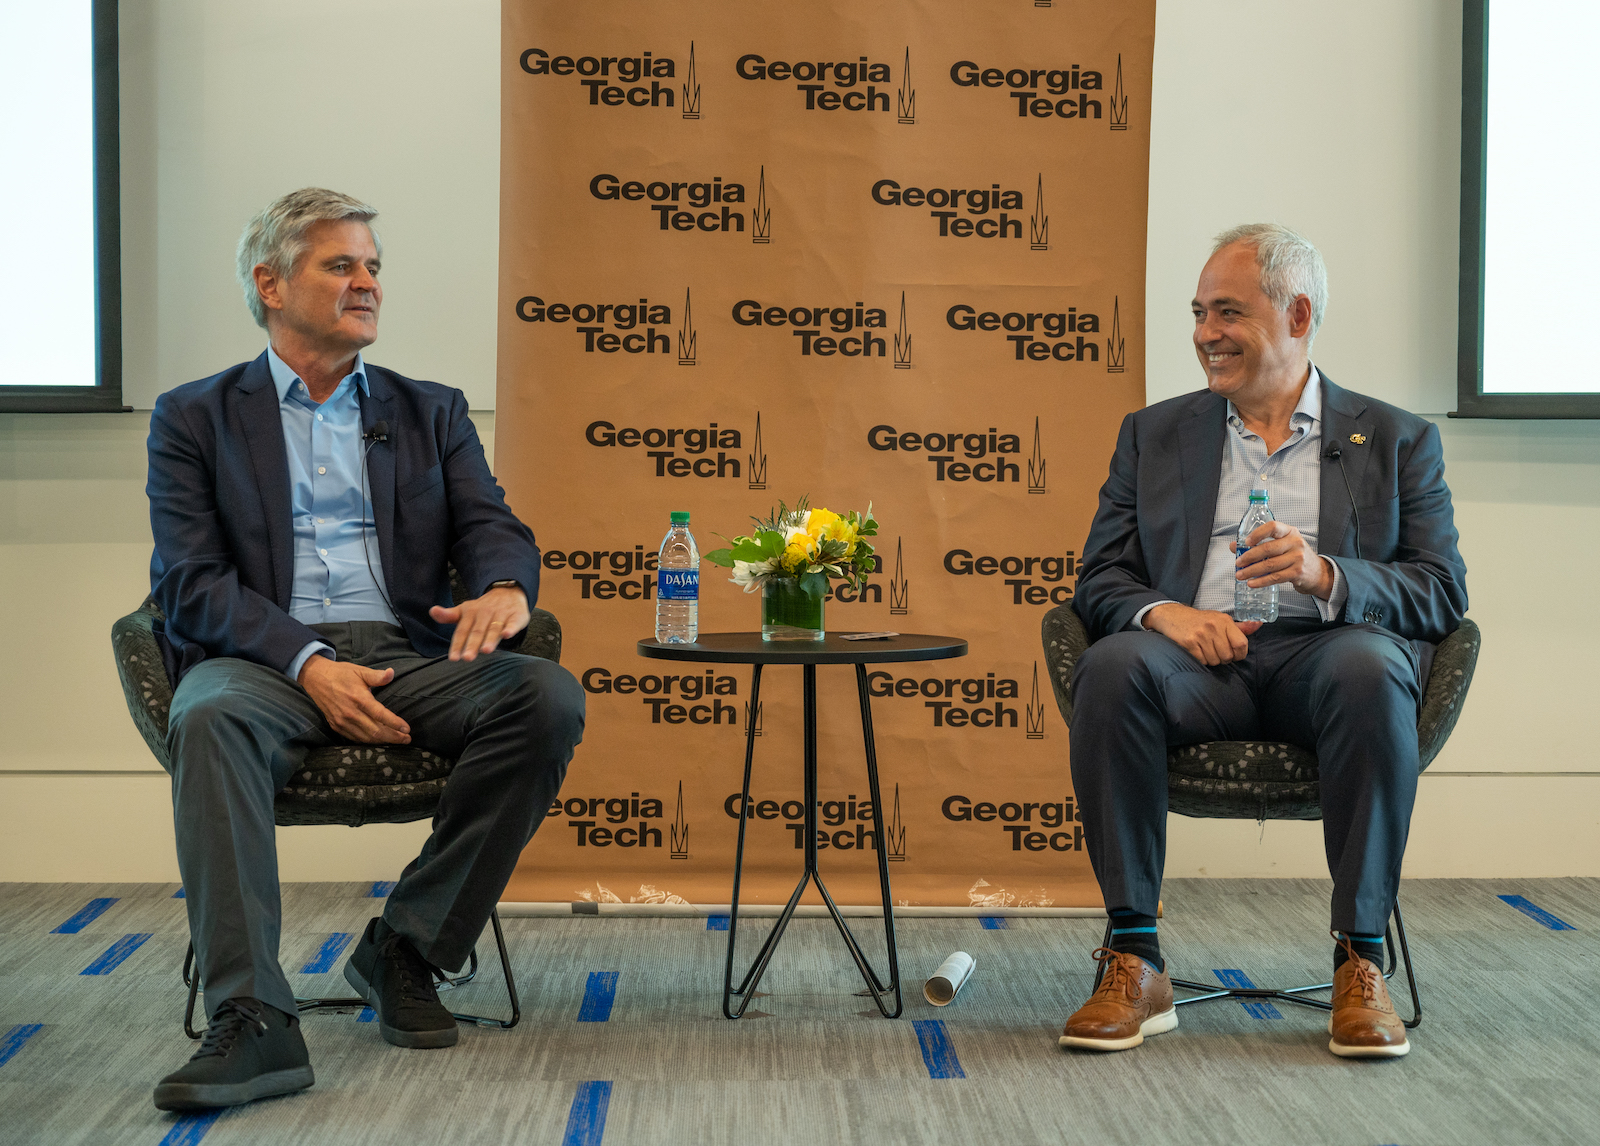 Steve Case, co-founder of AOL and investment firm Revolution LLC, and President Ángel Cabrera at the Inclusive Entrepreneurship forum. Photo by Allison Carter.